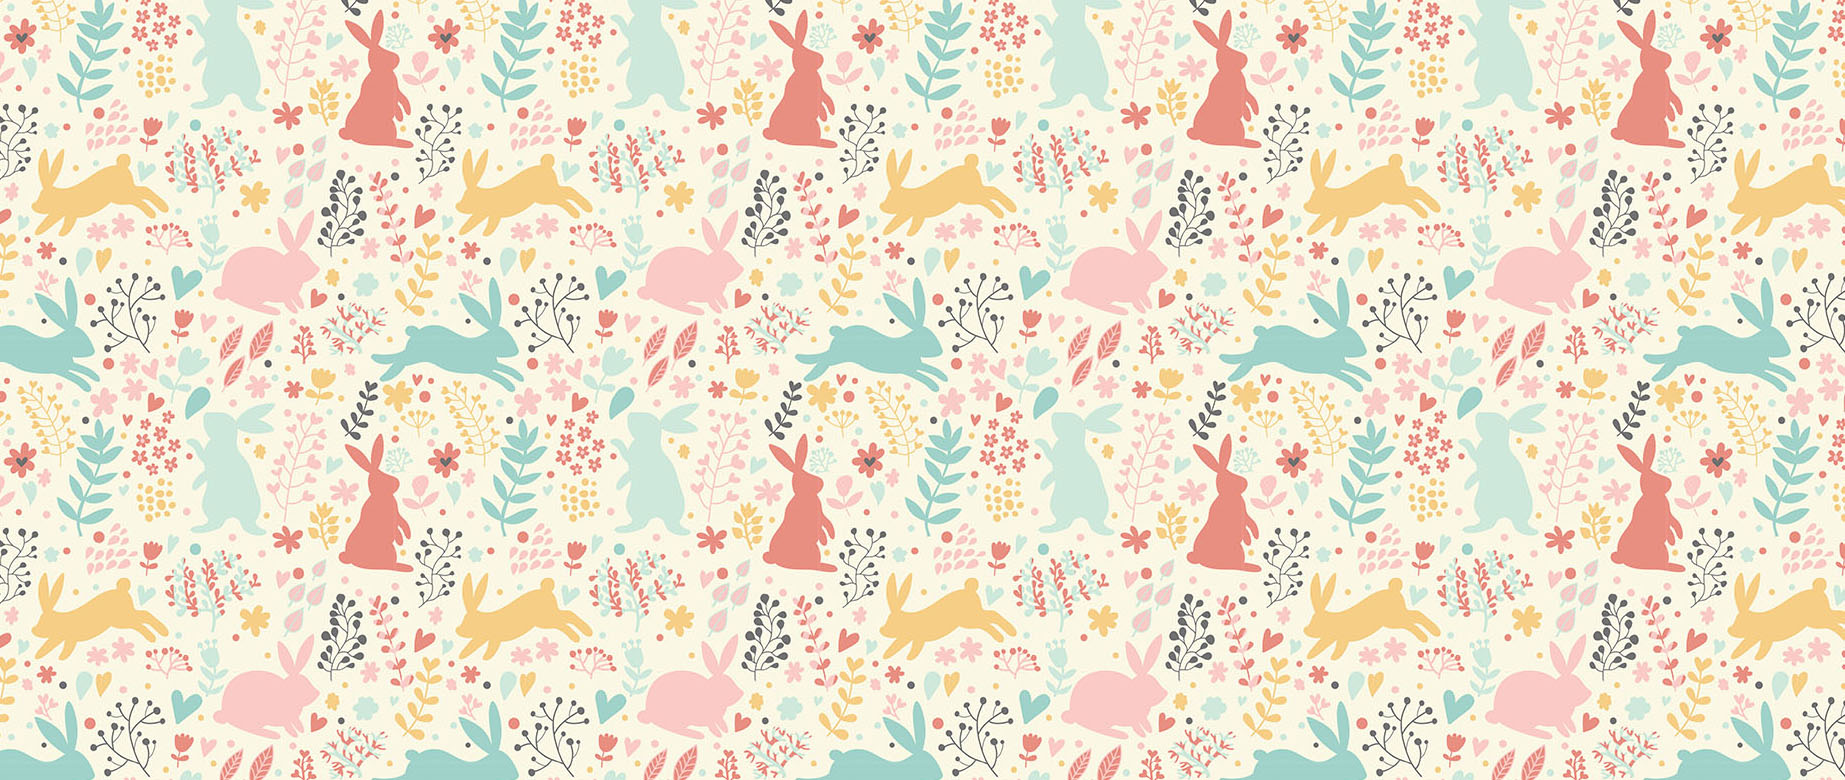 hopping-rabbit-and-leaves-wallpaper-seamless-repeat-view